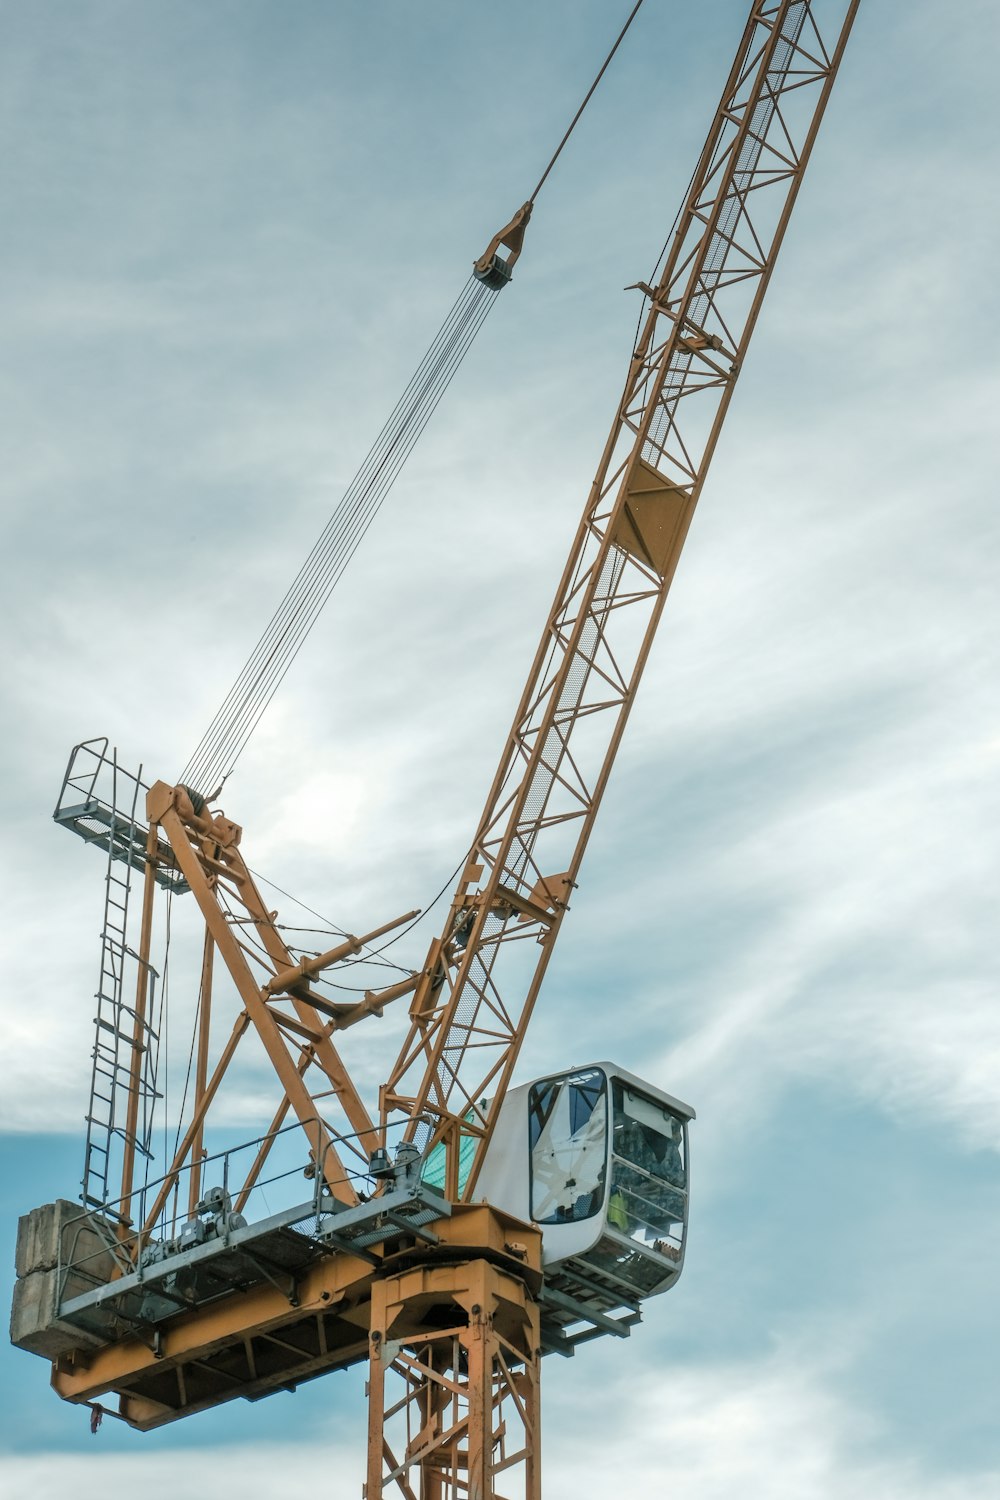 orange and gray crane under cloudy sky during daytime